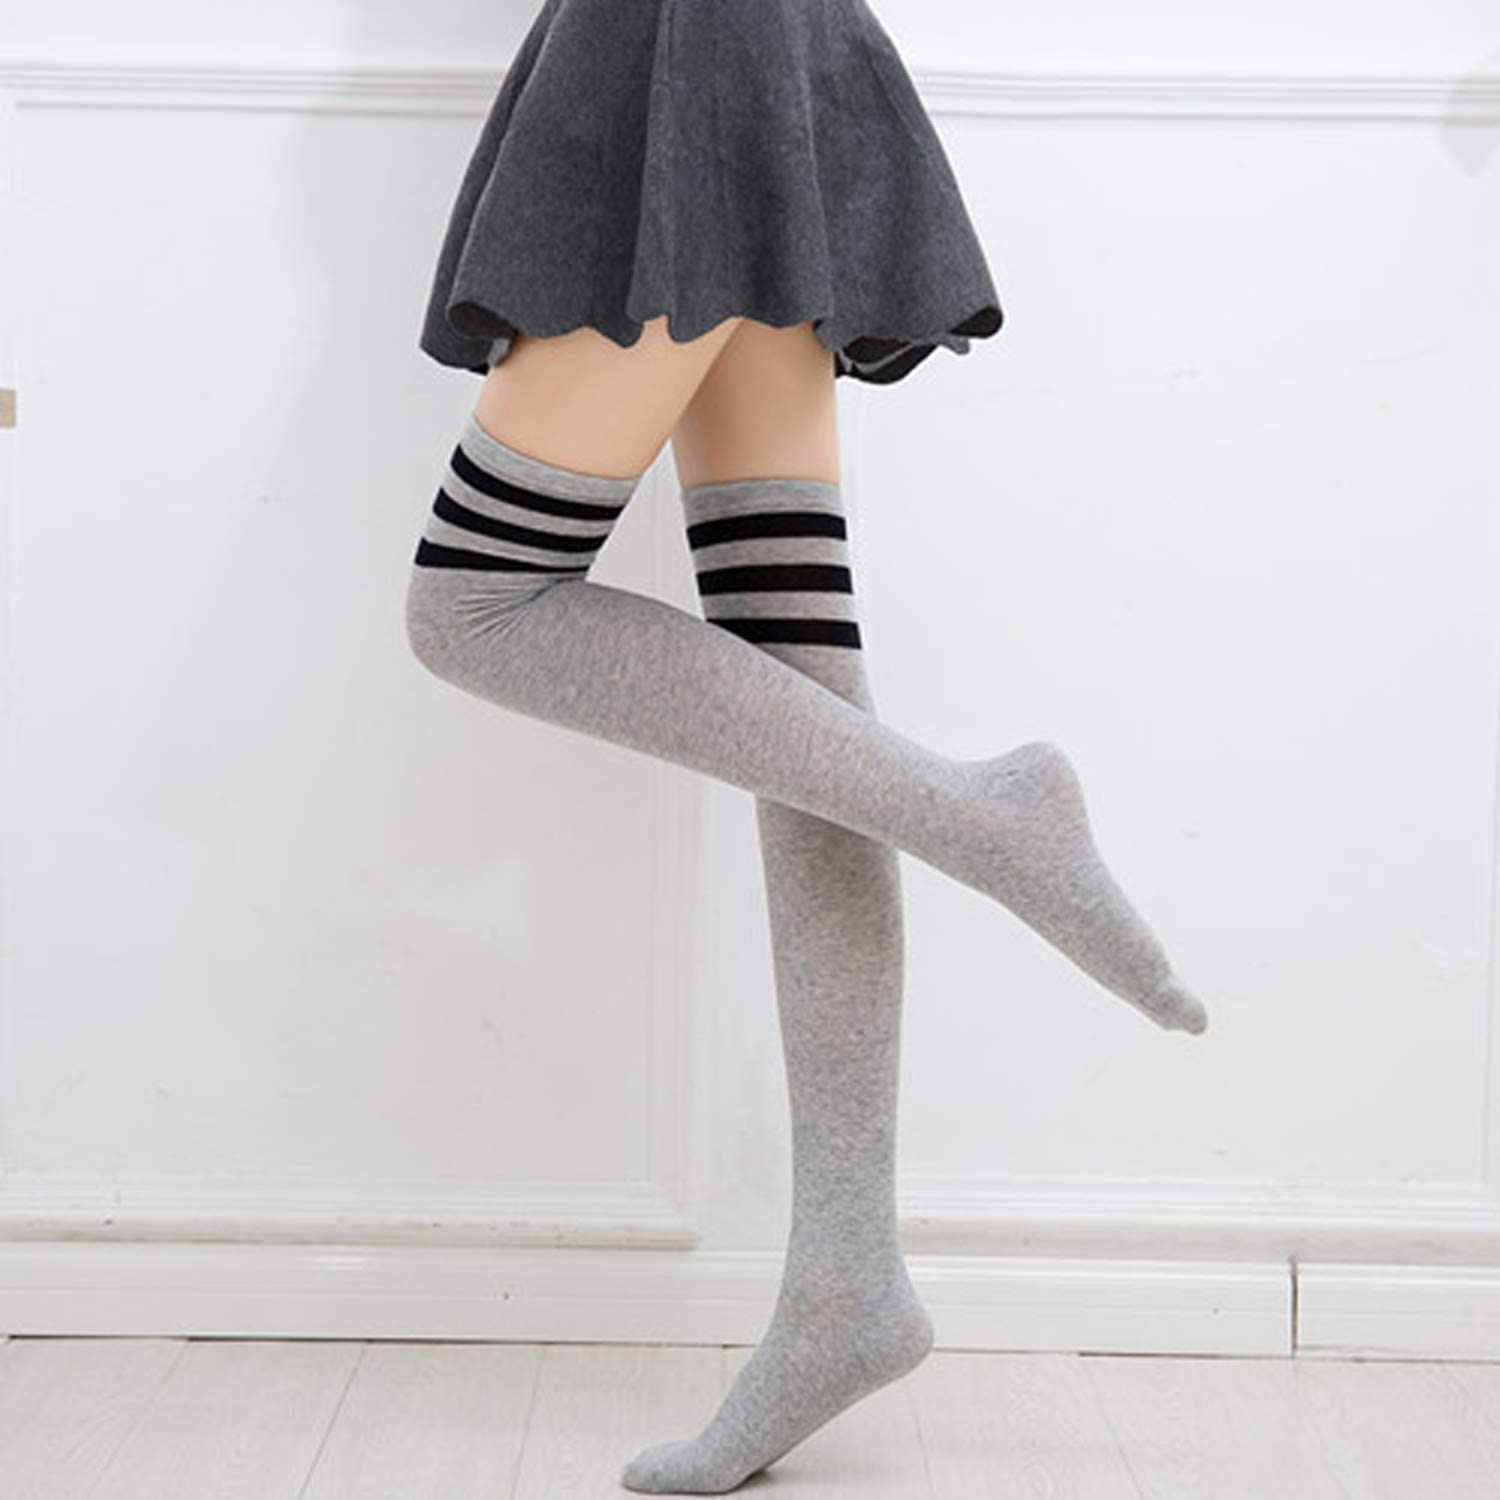 DRESHOW 6 Pairs High Thigh Socks Striped Over Knee Thin Tights Long Stocking for Women Leg Warmer